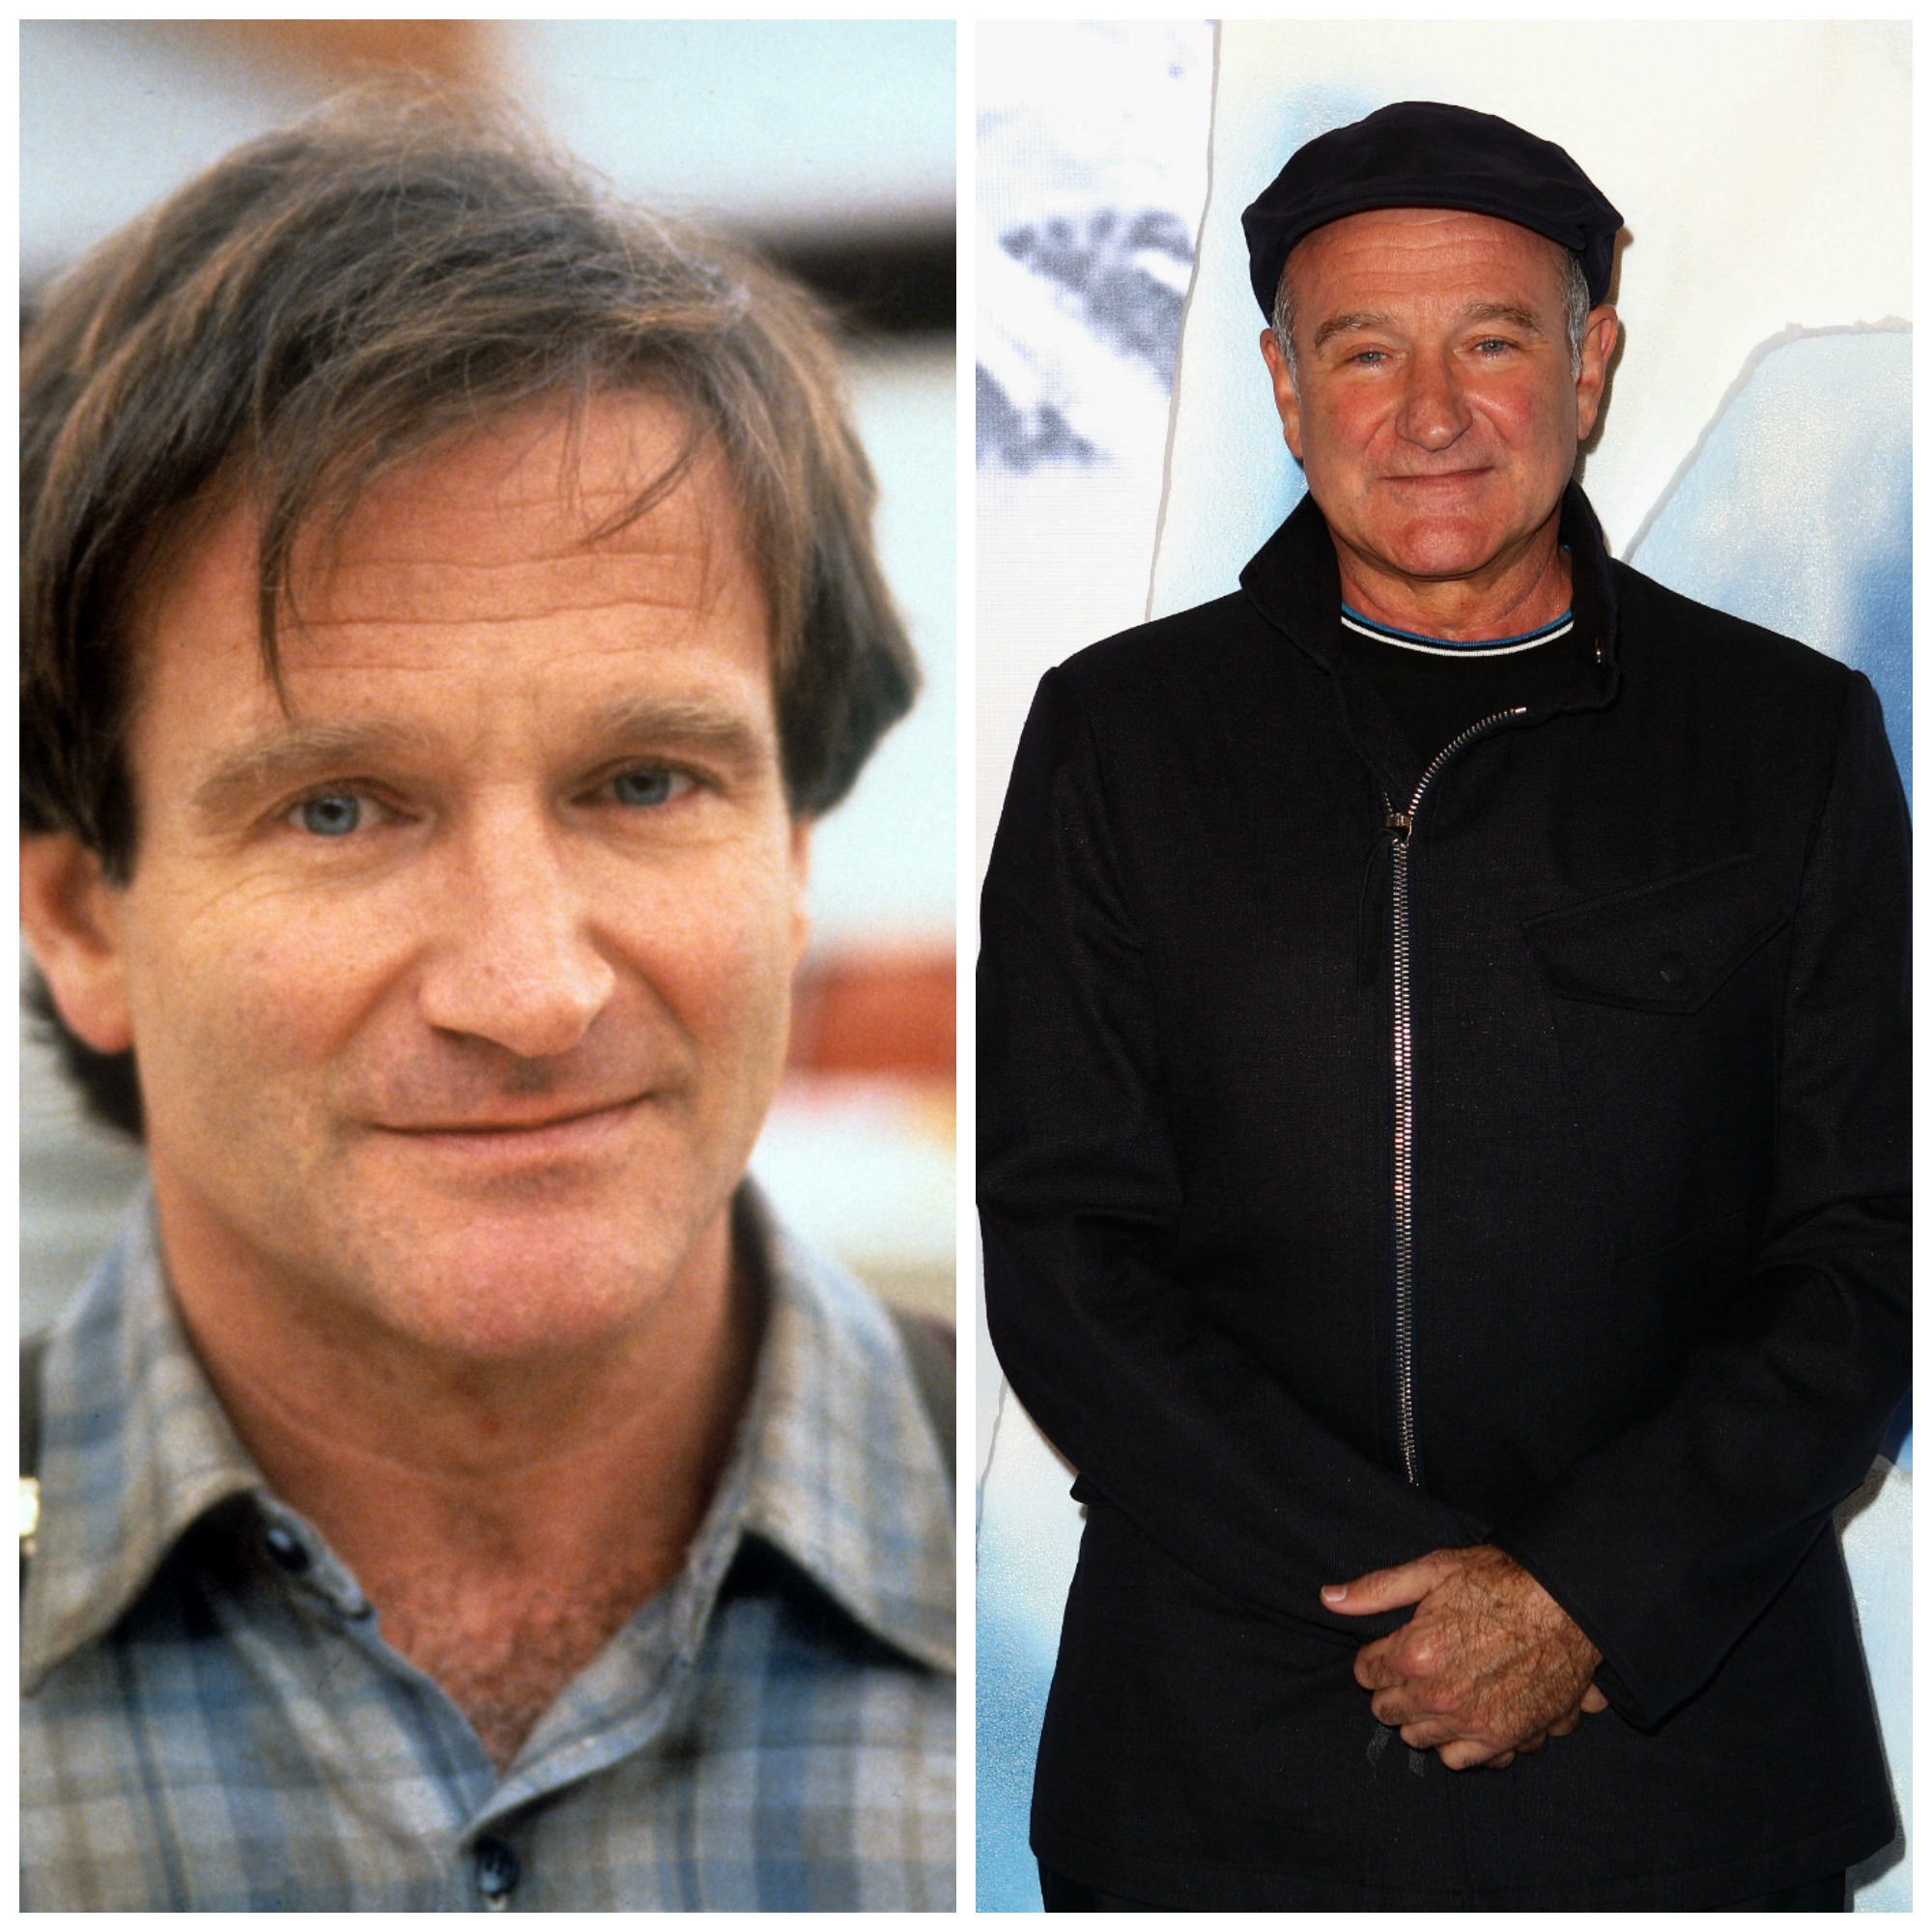 Robin Williams - Getty Images